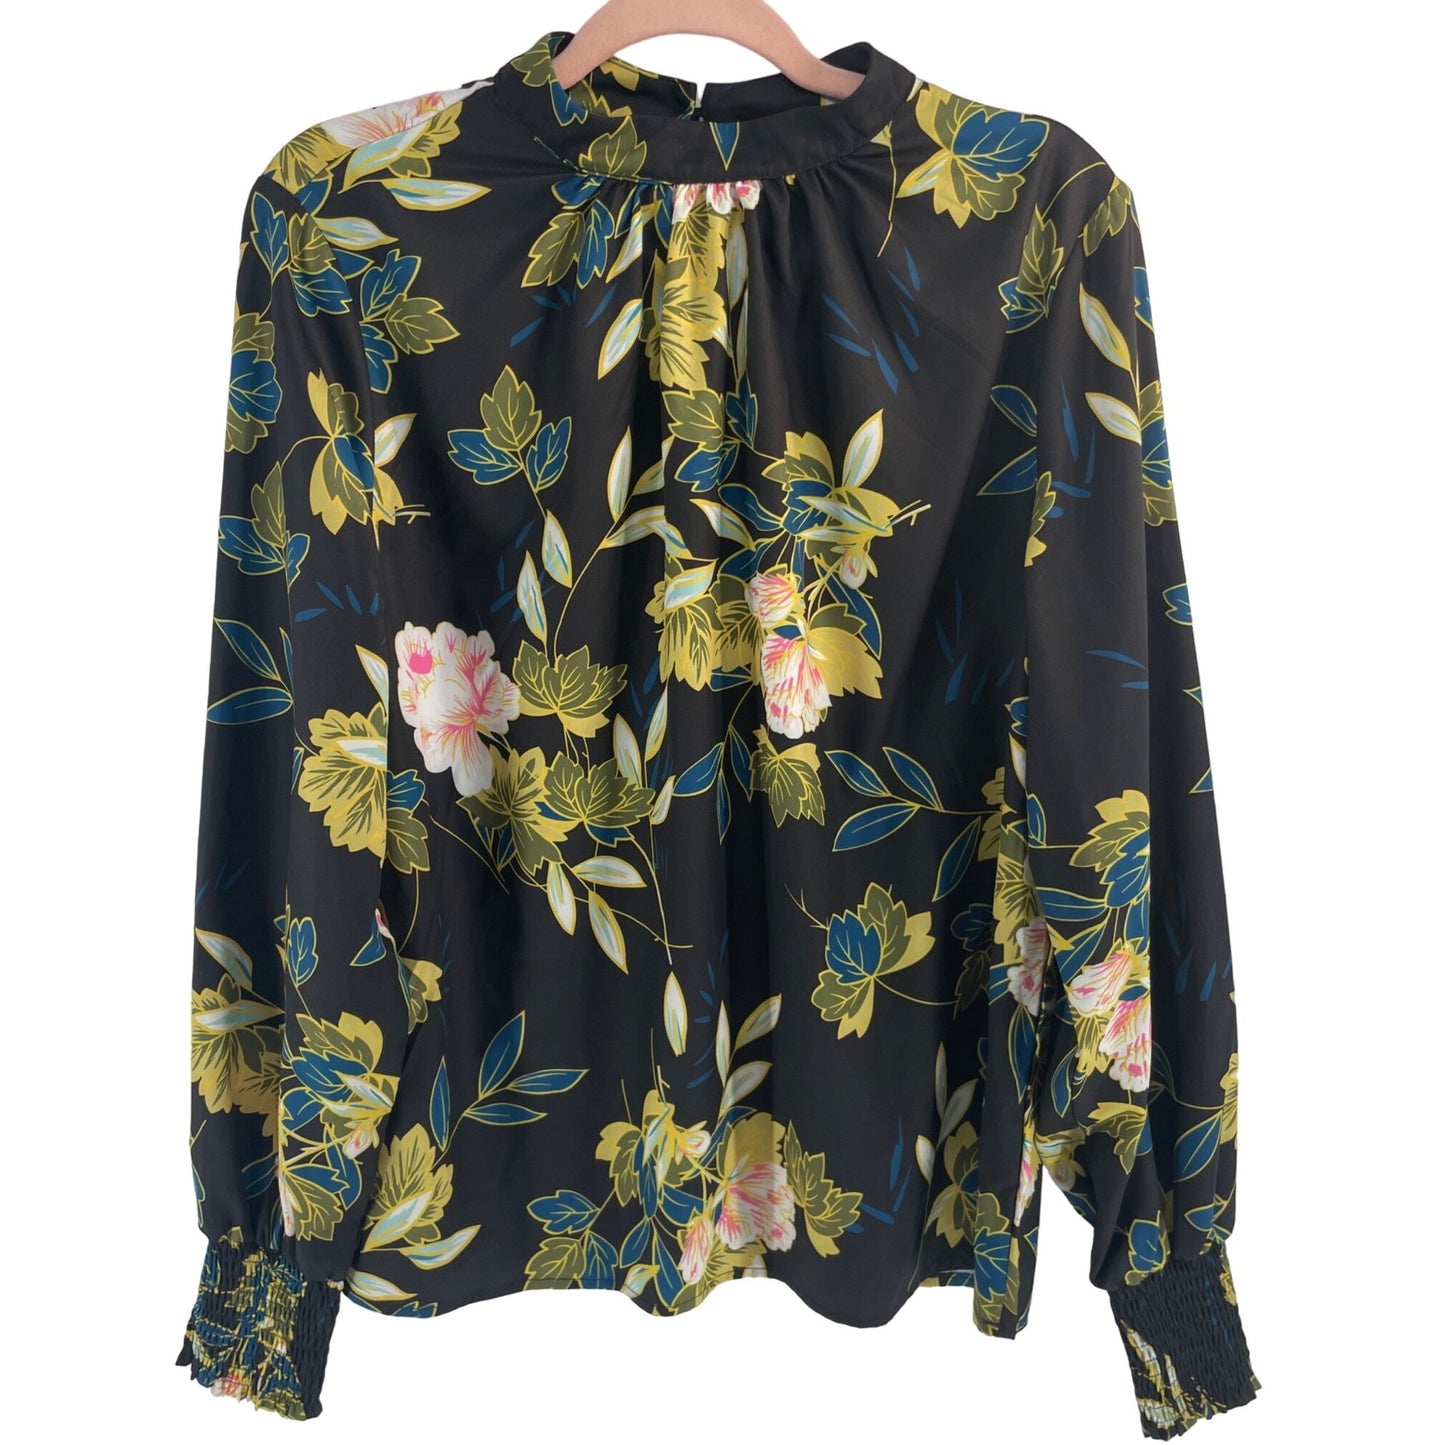 Shein Women's Size XL Black/Multi-Colored Floral Long-Sleeved Blouse